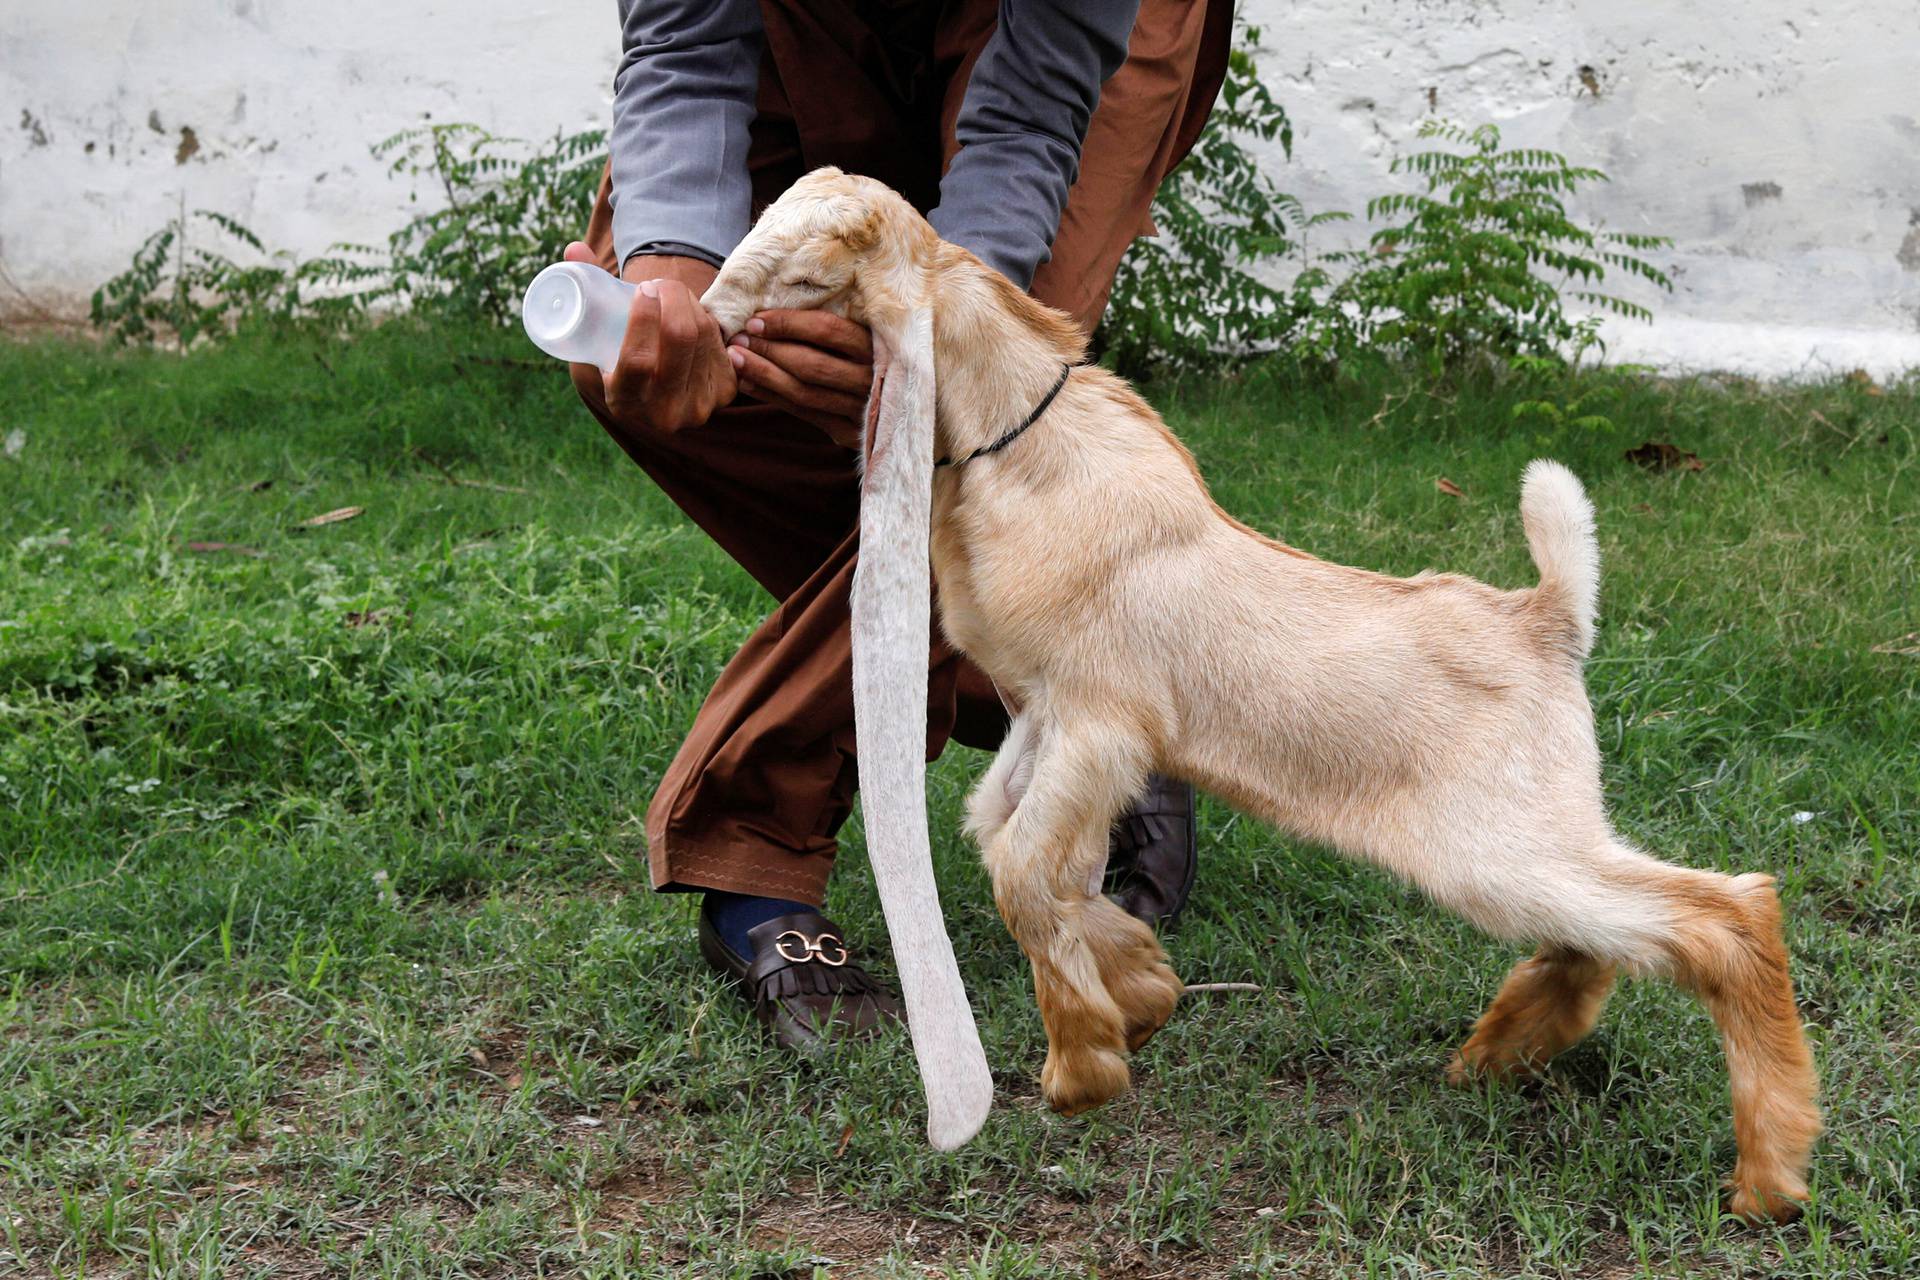 Simba, one month and four days old kid goat with 22-inch long ears, in Karachi